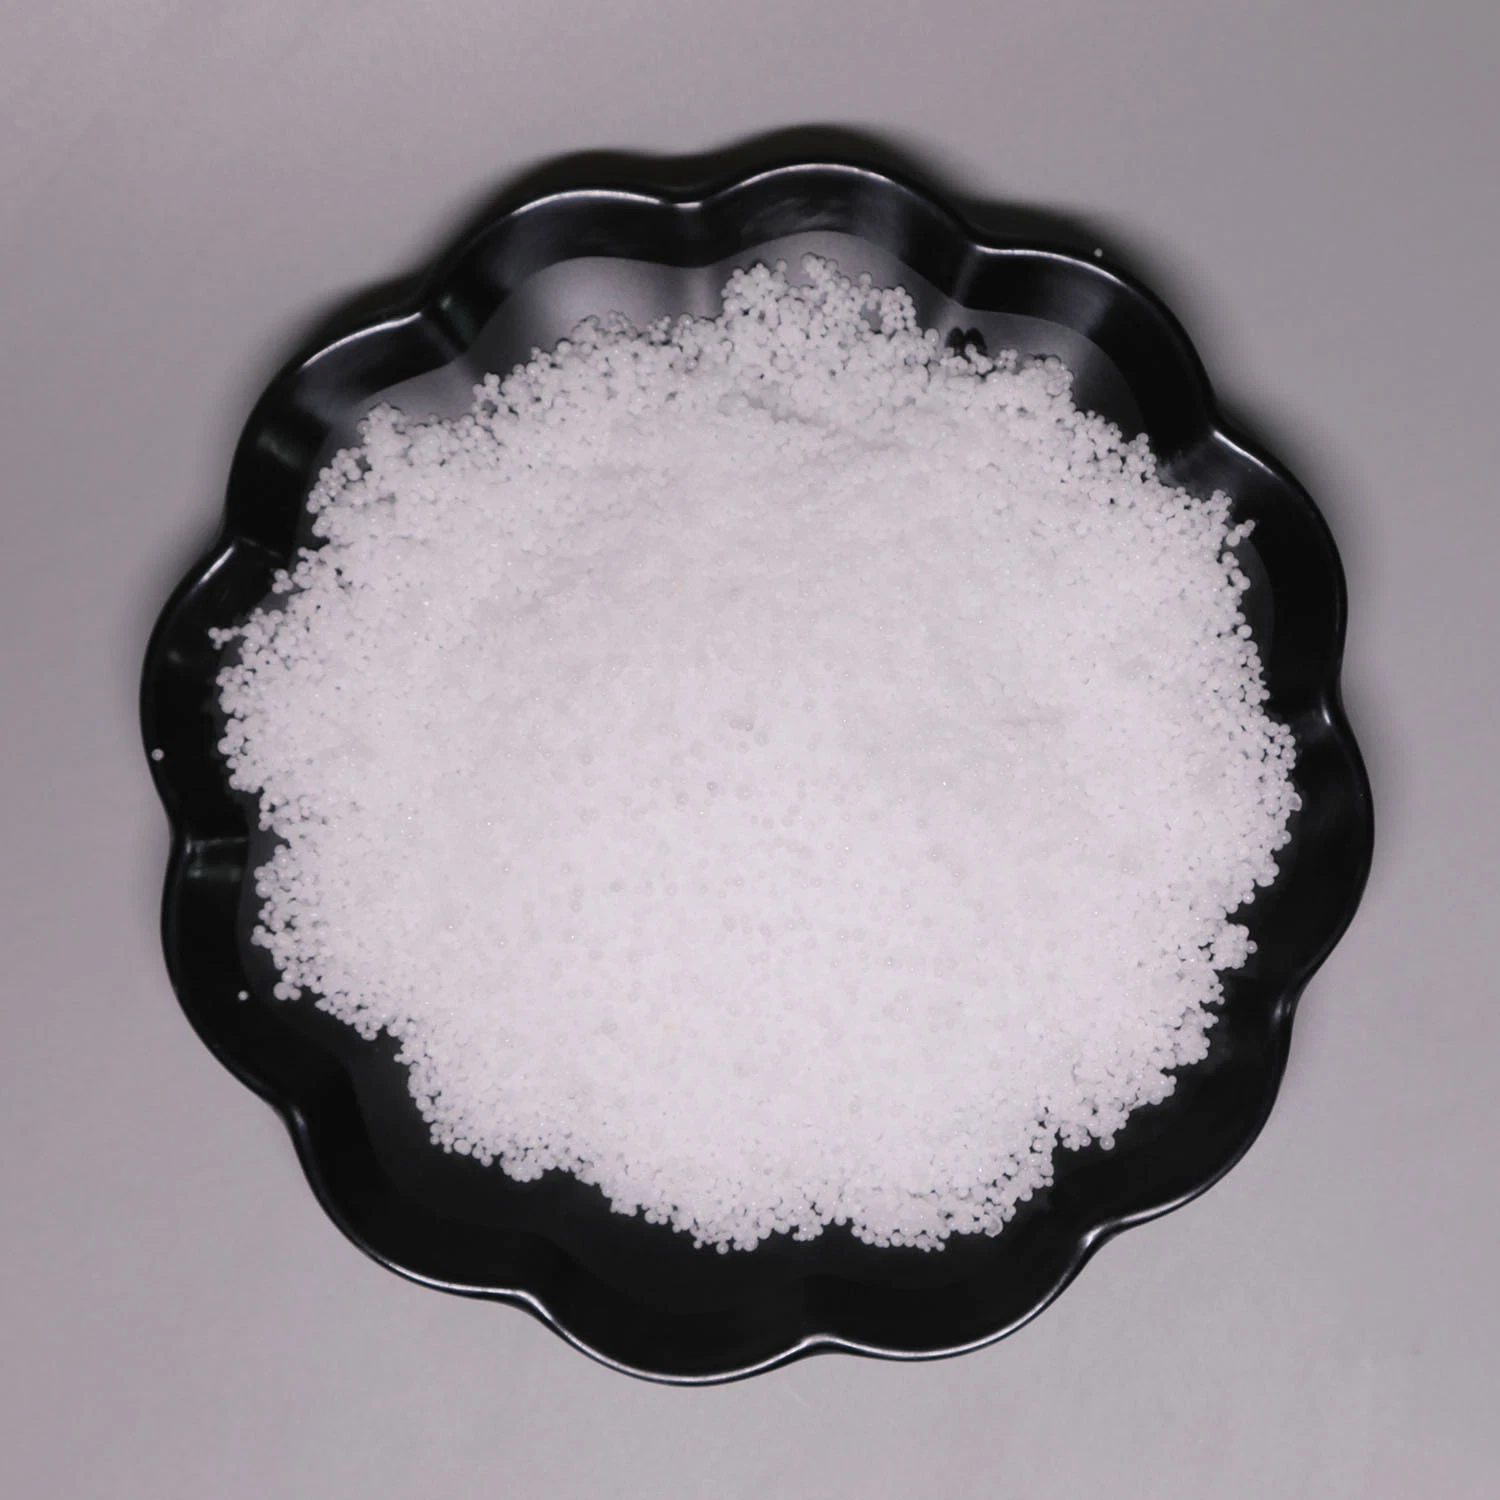 Soda99 High Quality Sodium Salt Chemicals Alkalinaoh Flake Caustic Soda Particle Competitive Price